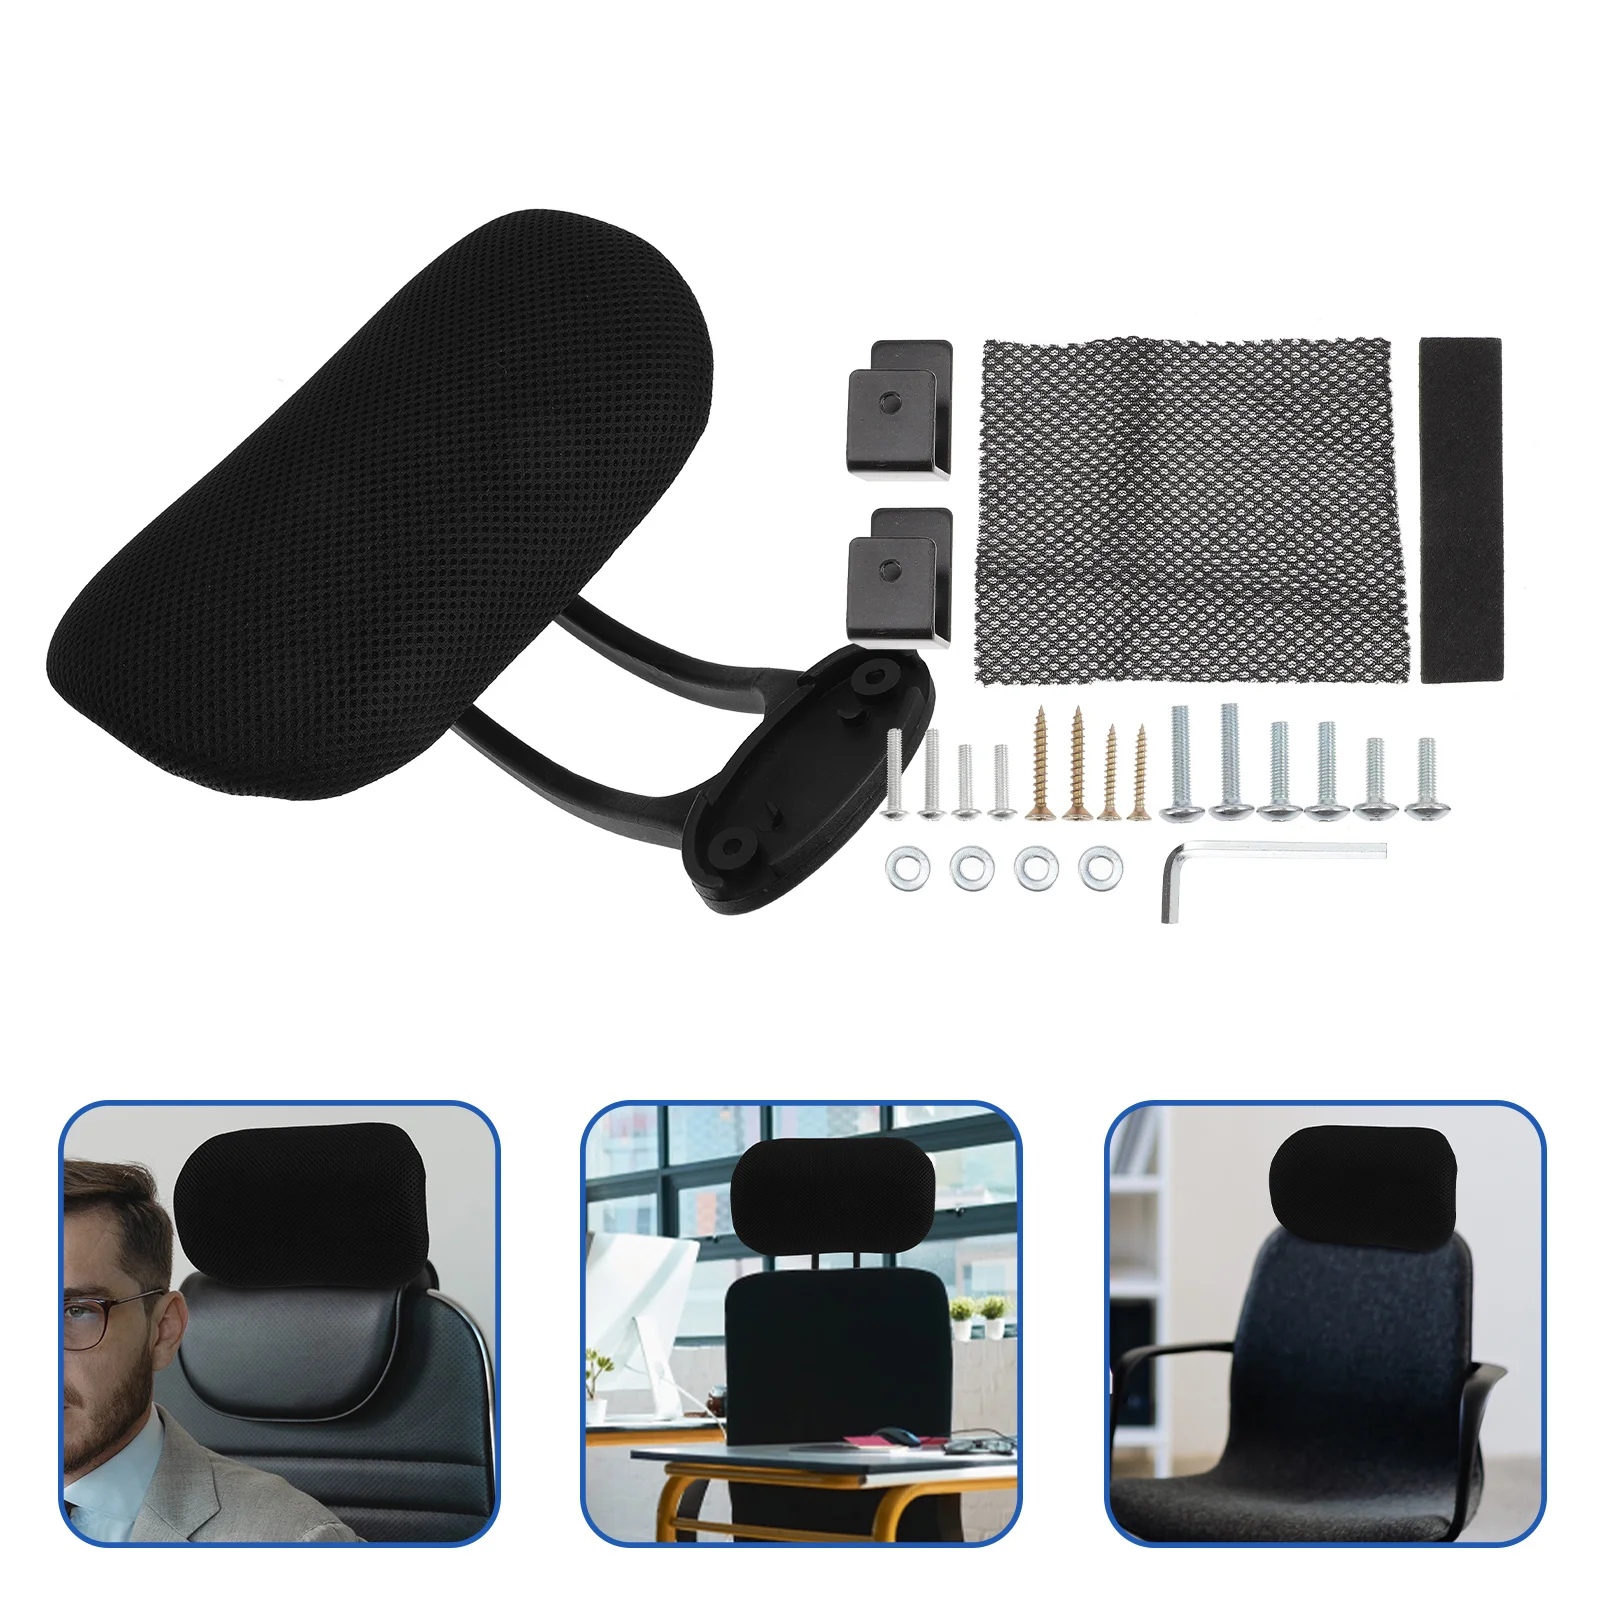 

Chair Headrest Pillow Attachment Head Computer Office Neck Protection Work Adjustable Universal Embody Desk Support Cushion